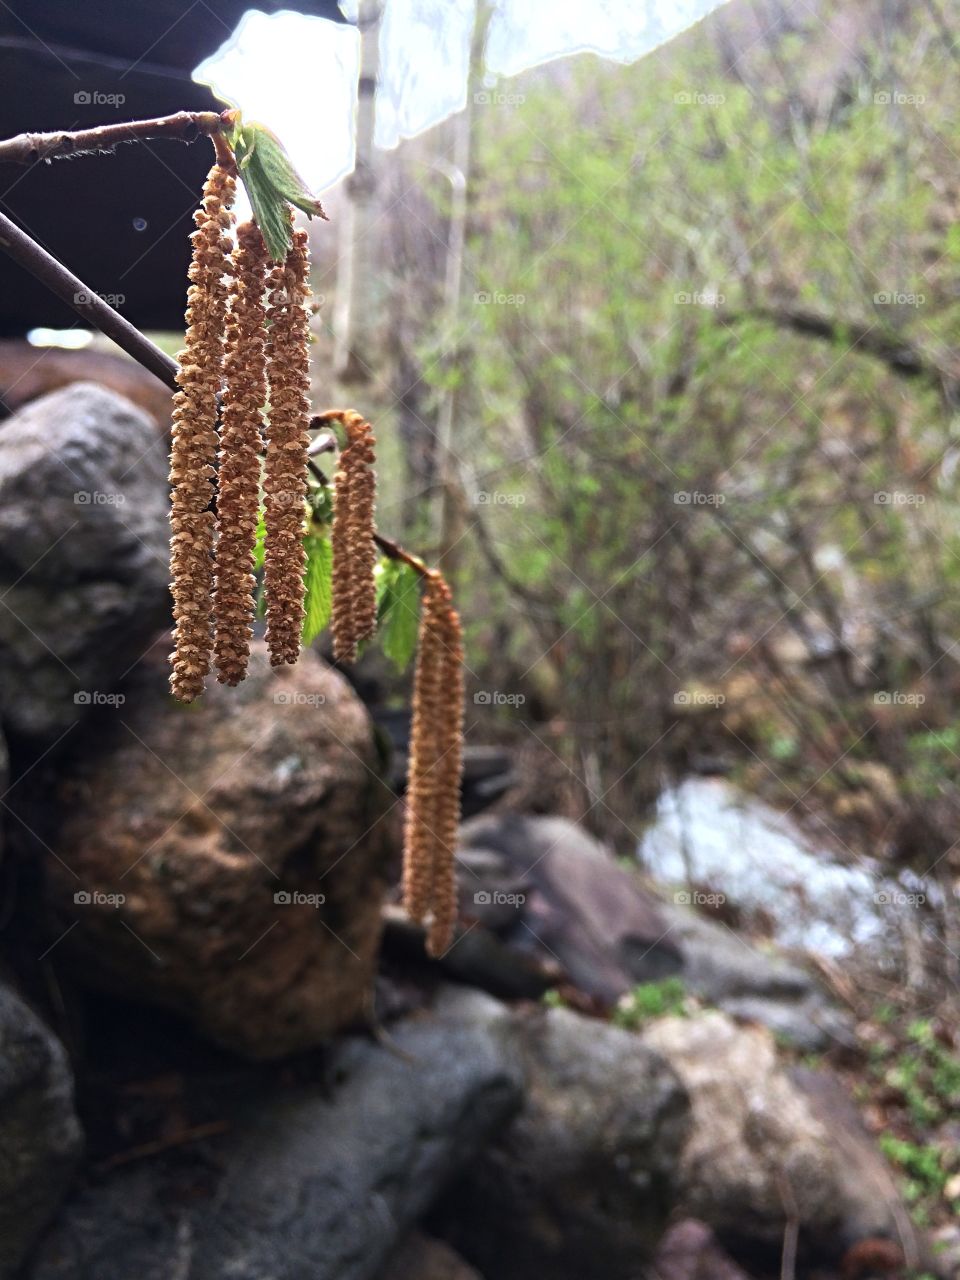 Nature accessories
Captured by iphone 5s 